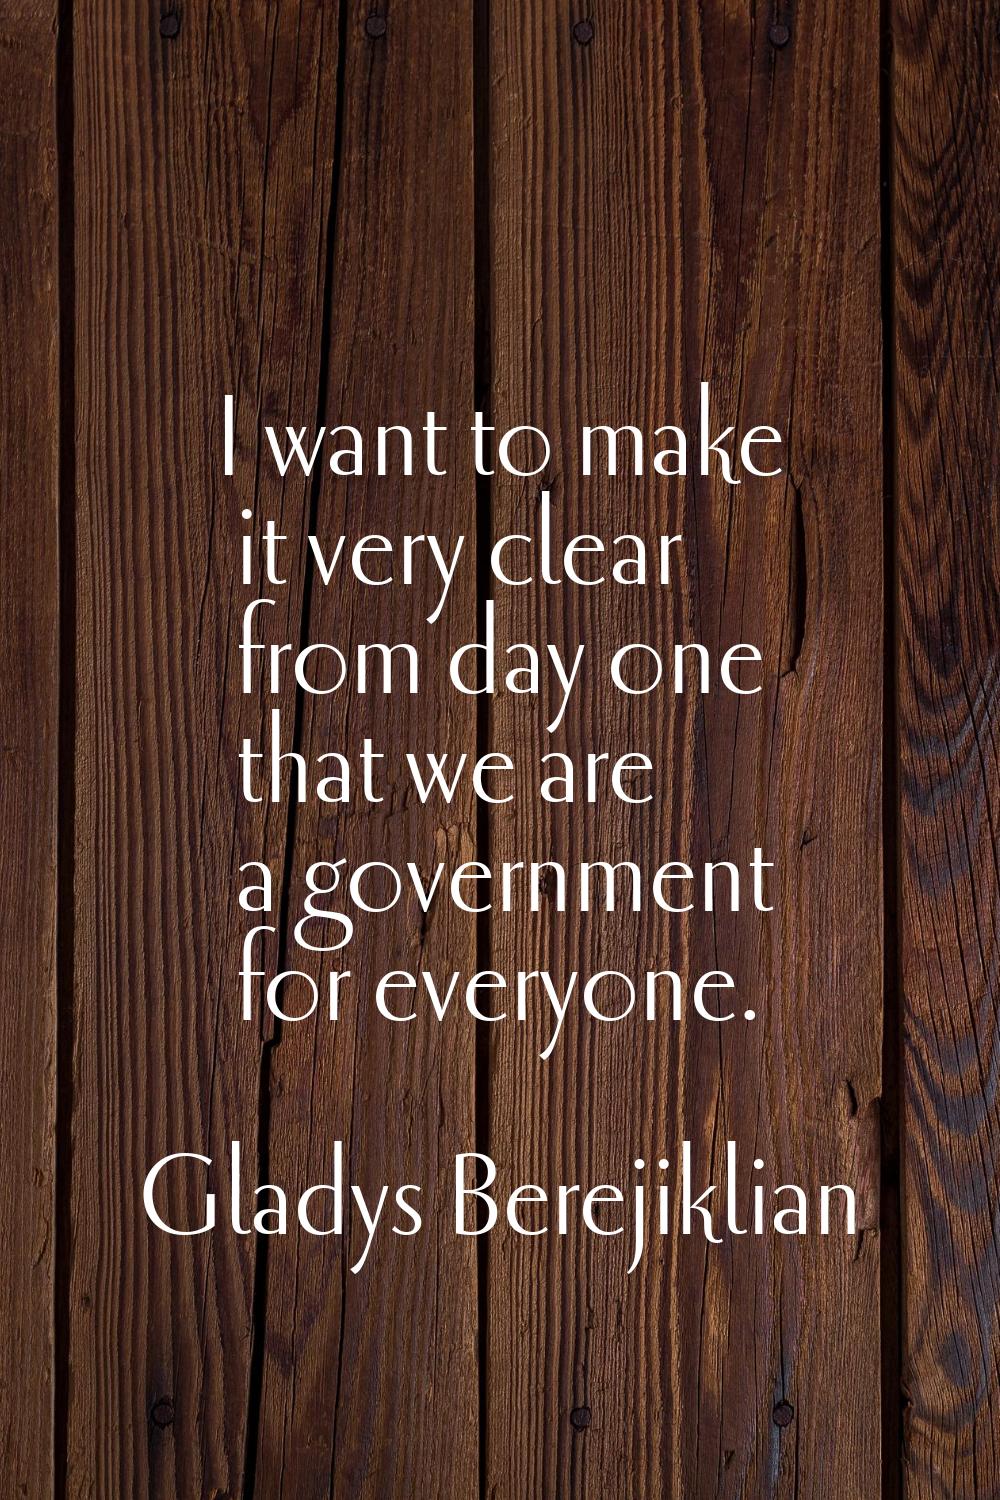 I want to make it very clear from day one that we are a government for everyone.